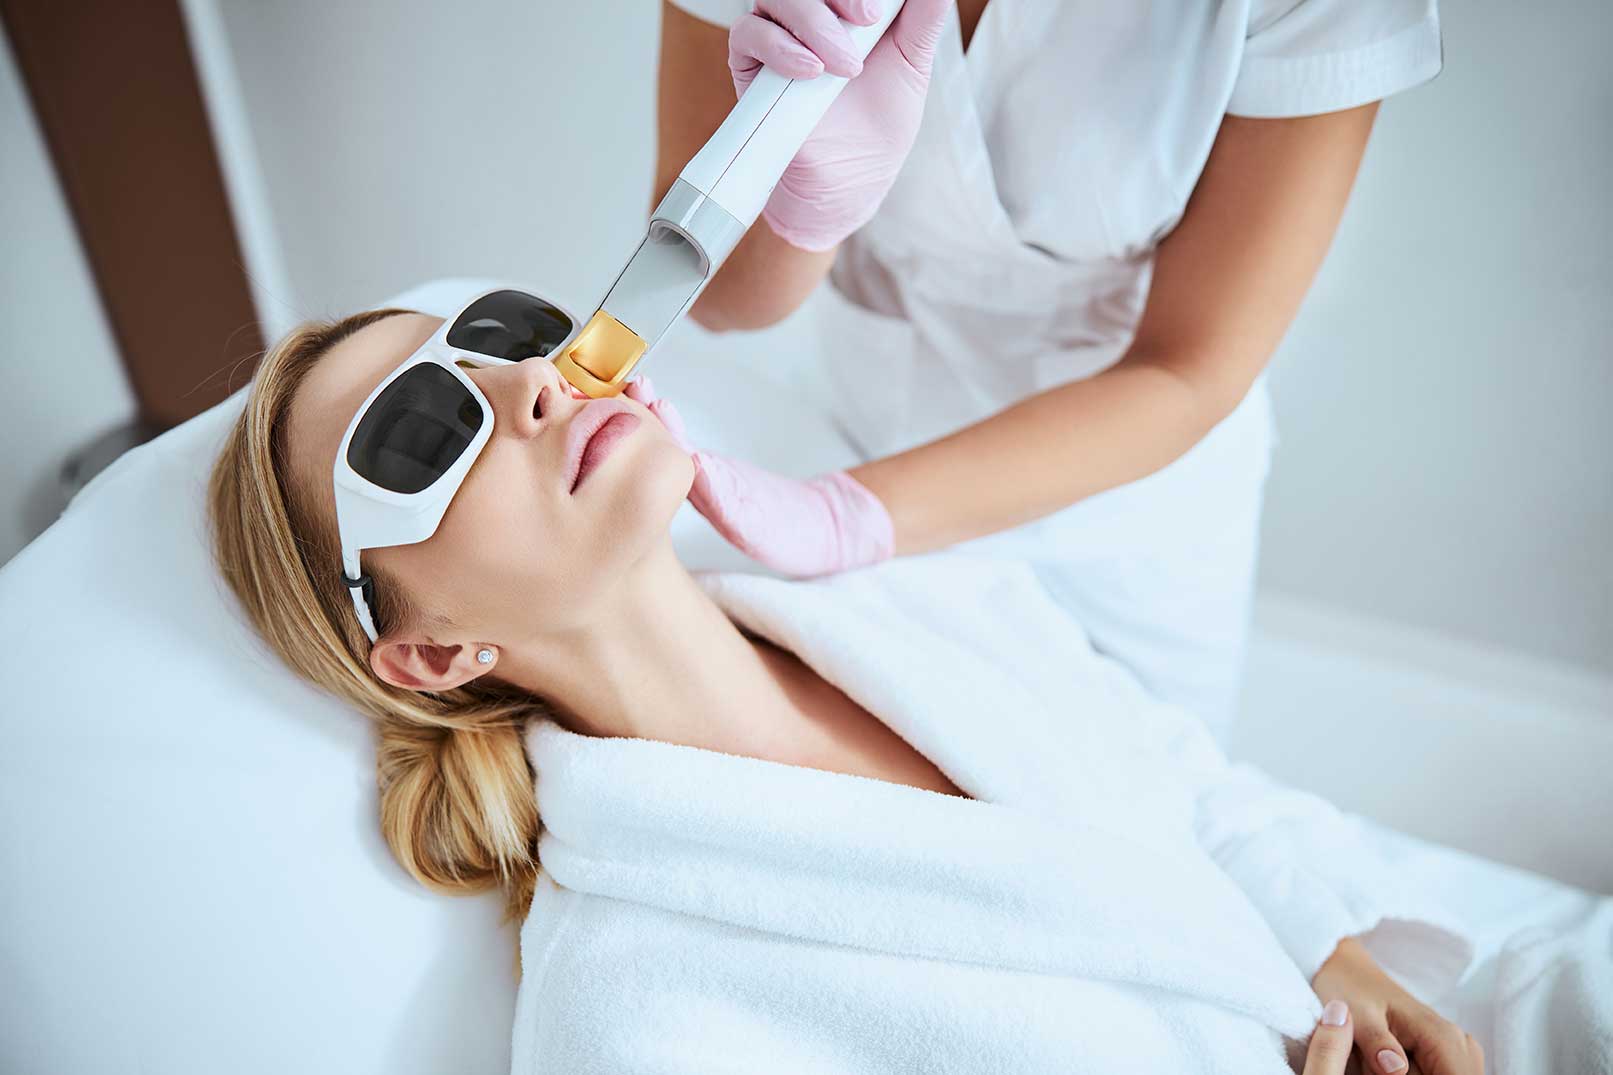 We provide non-invasive laser treatment that restores skin tone and treats fine lines, wrinkles, scars, large pores, and active acne for a youthful skin tone and texture.